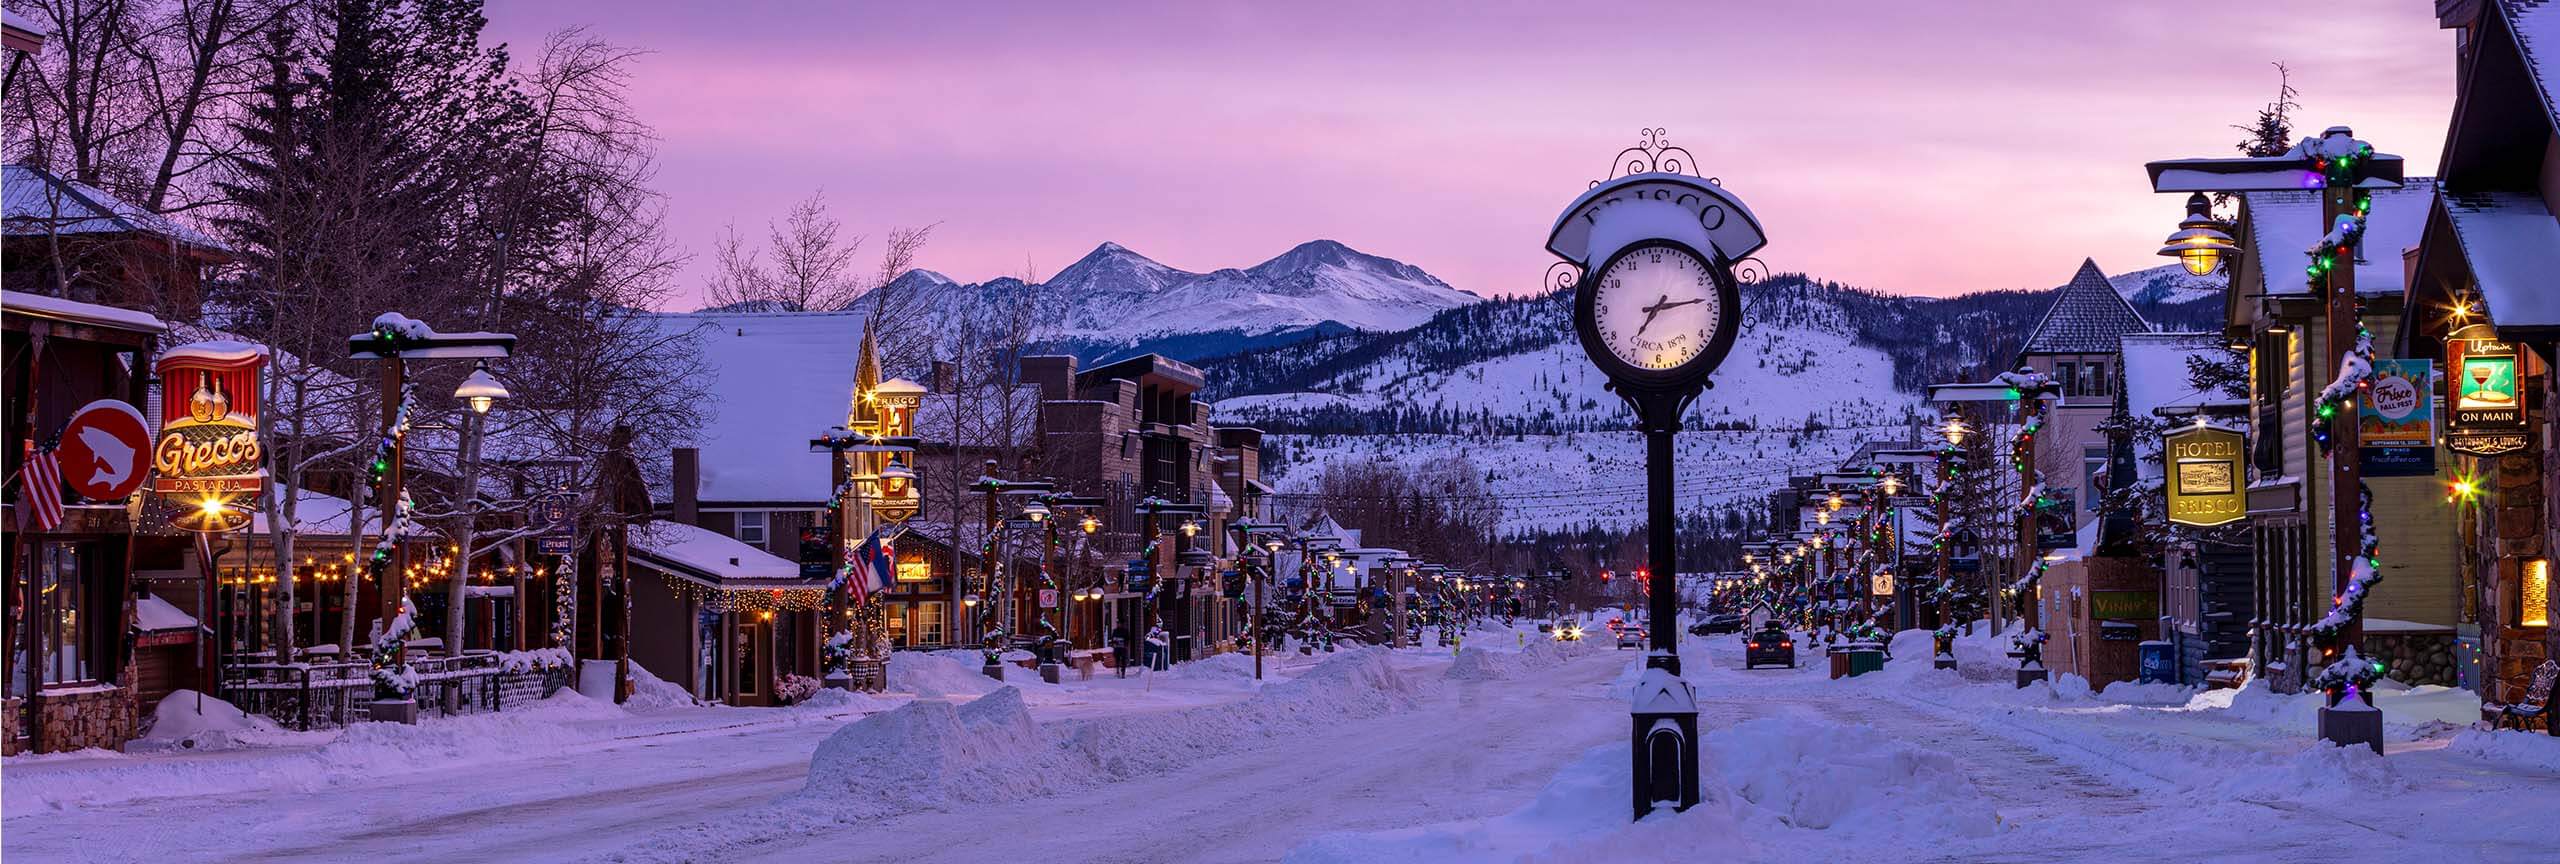 Frisco Main Street with snow at sunset